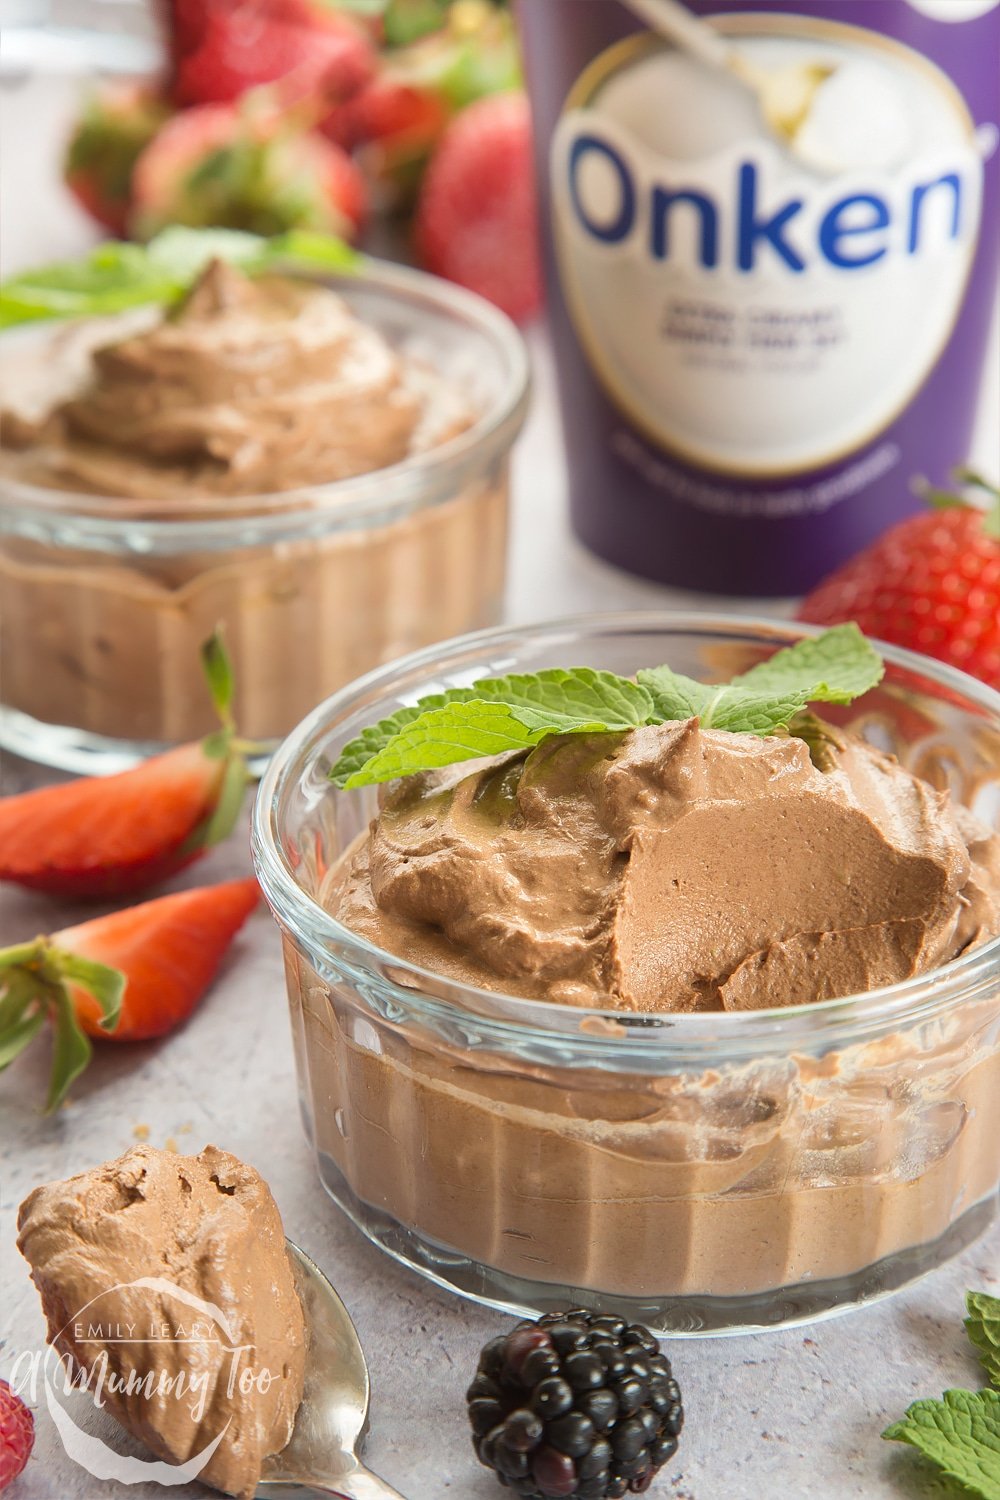 Avocado yogurt chocolate mousse - a delicious, creamy take on the traditional chocolate mousse - made with Onken Extra Creamy Yogurt